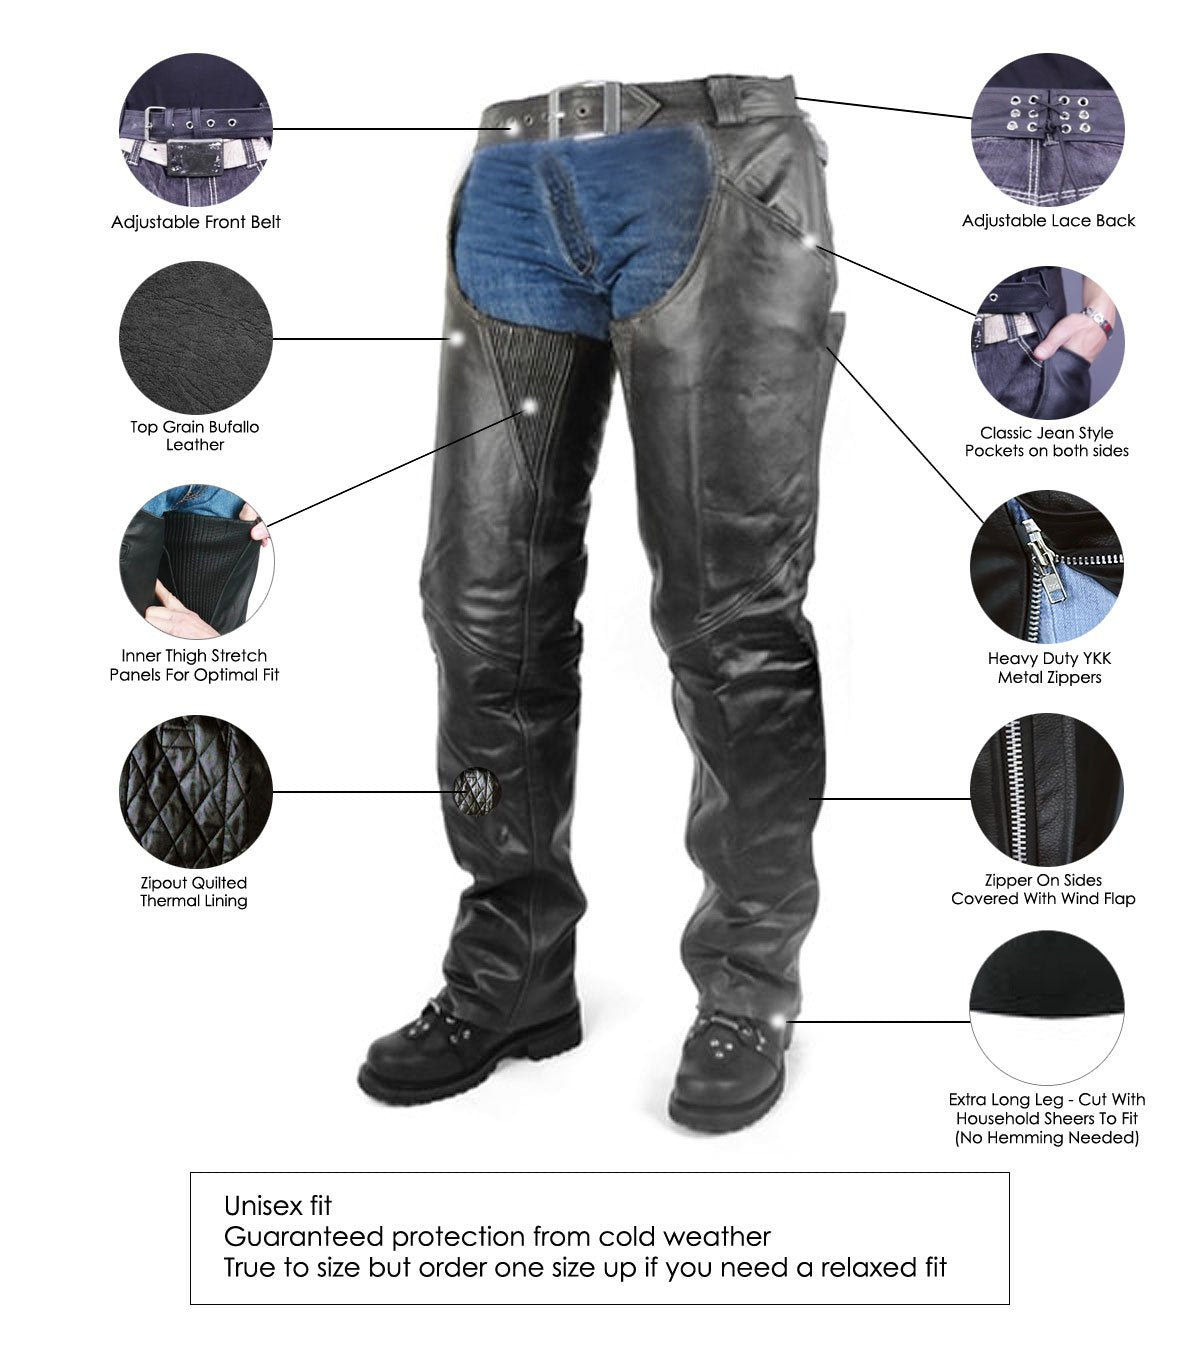 VL806 S Vance Leather Economy Chaps with Removable Liner